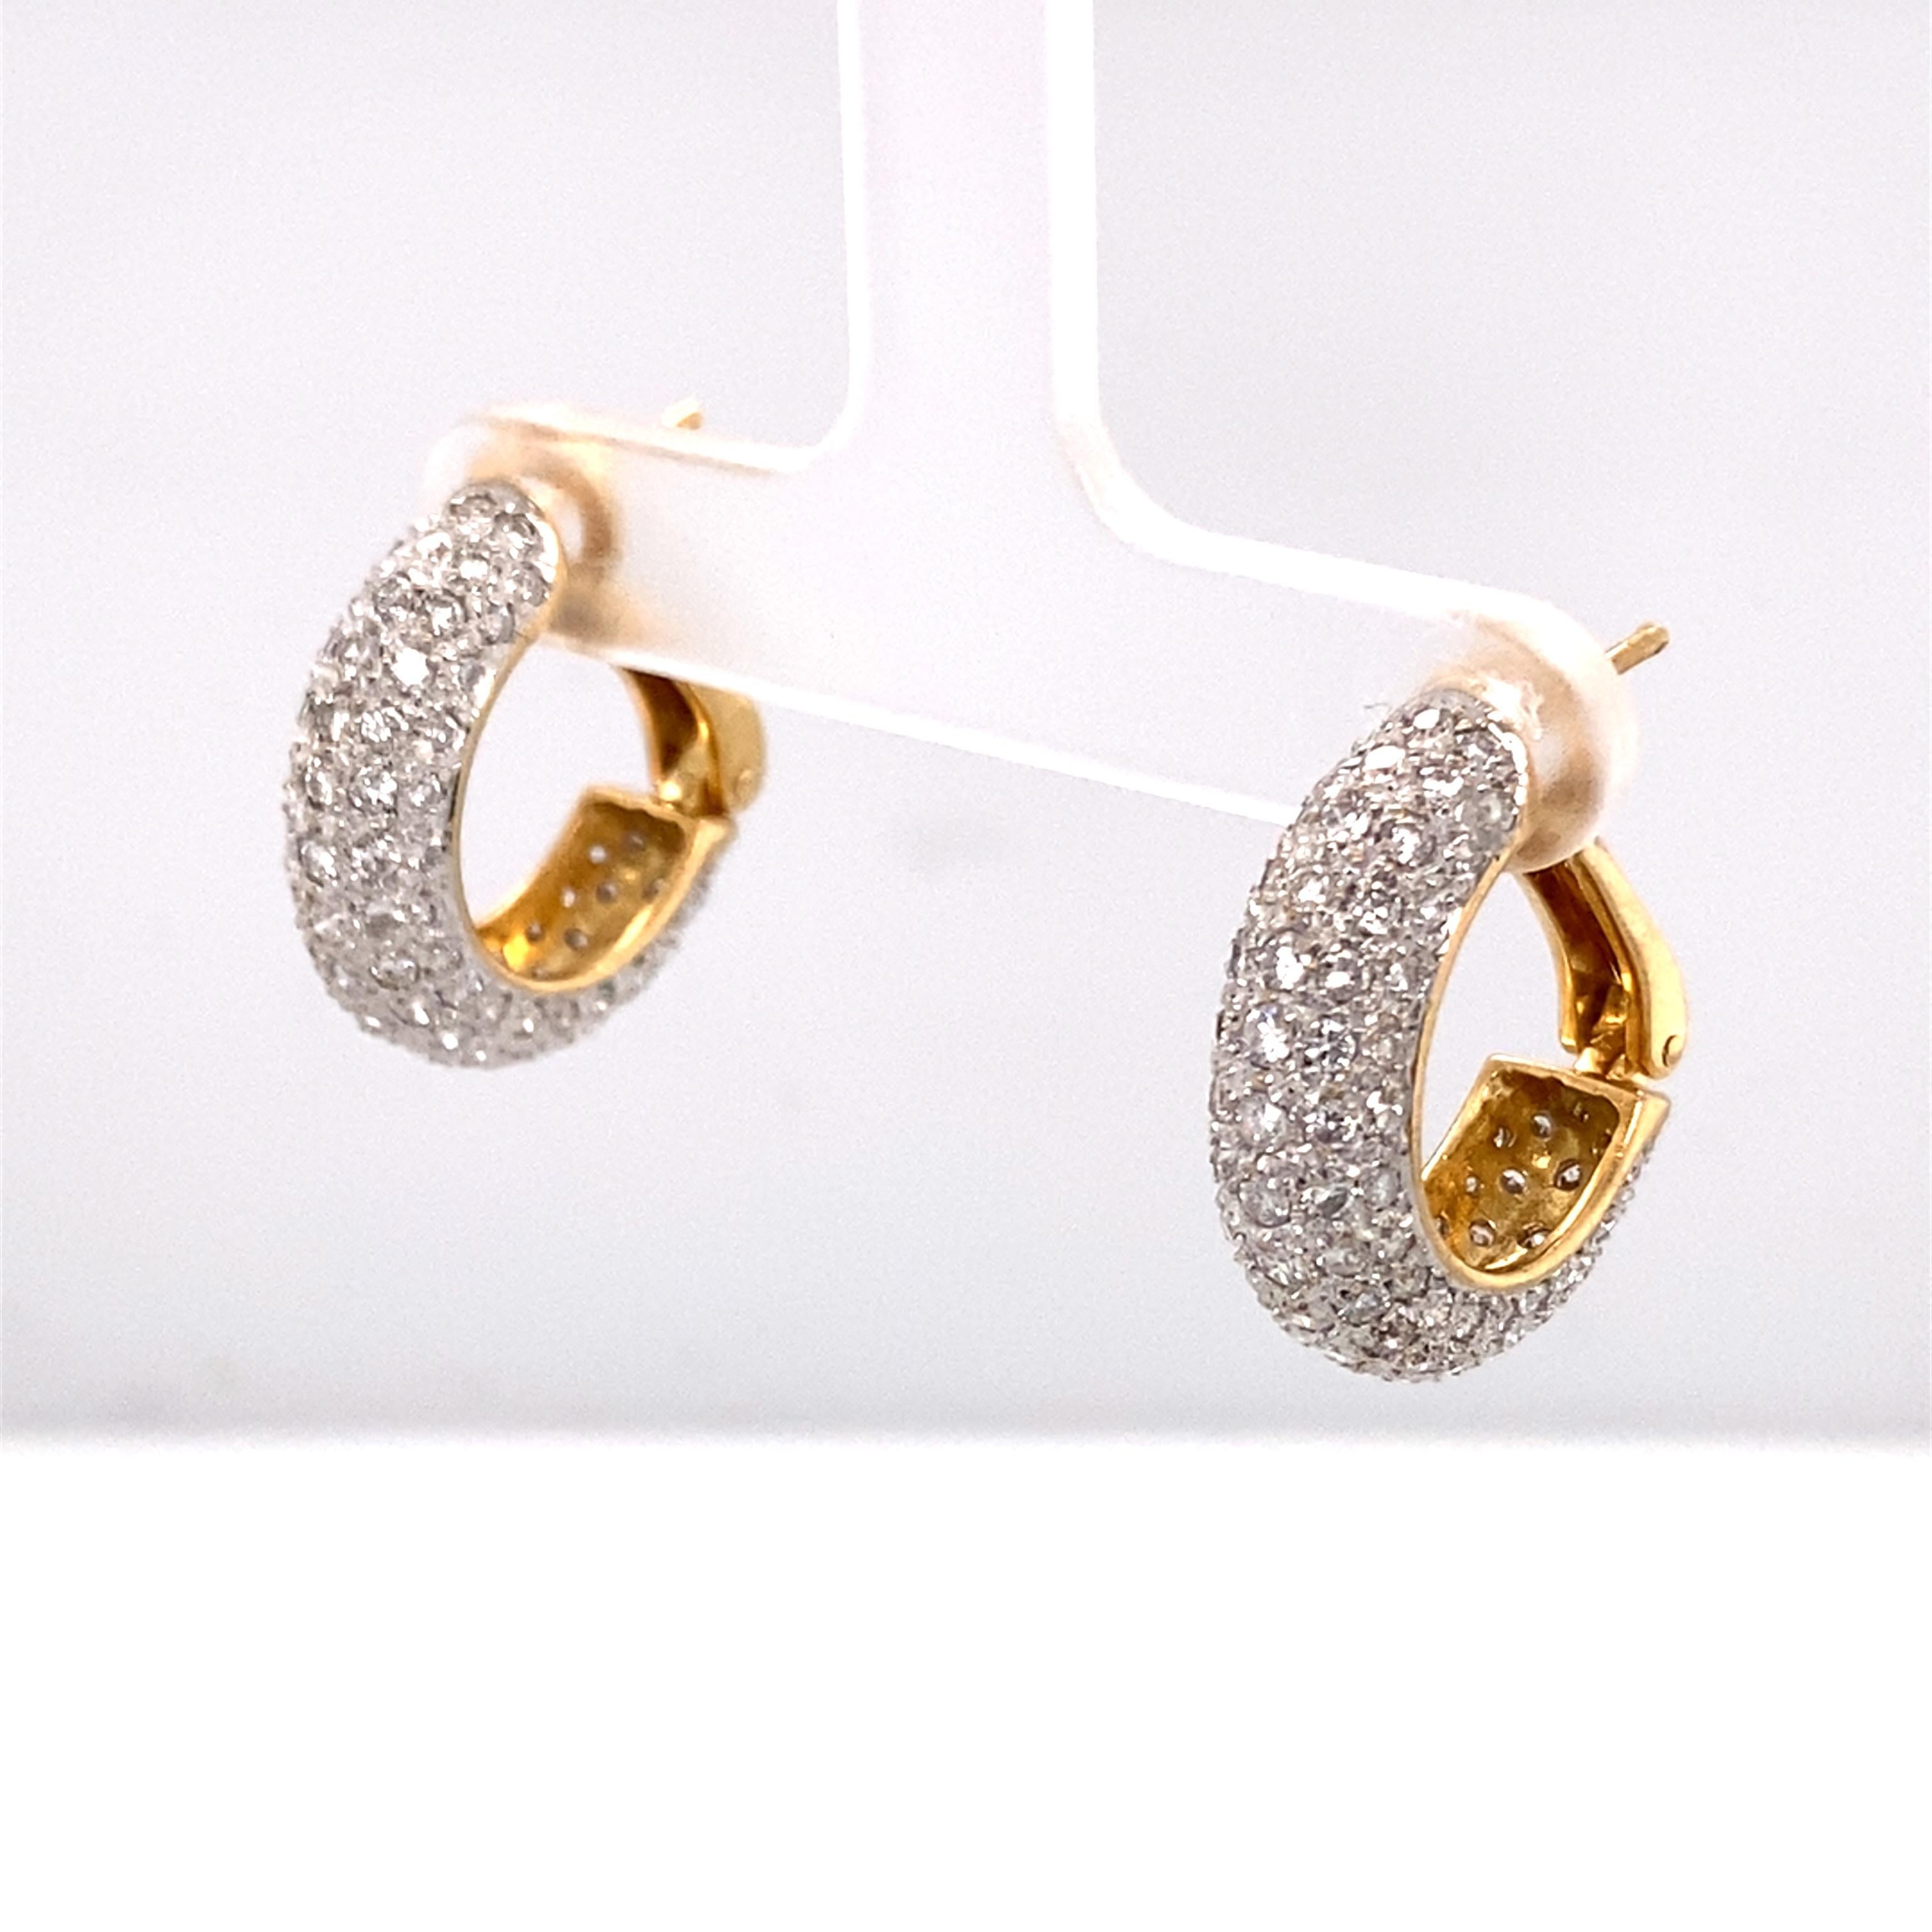 Item Details:
Type: 18 Karat Two Tone Gold
Weight: 9.6 grams
Measurements: .75 inches length x .50 inches width 

Diamond Details: 
Cut: Round 
Carat: 3.50
Cut: G-H
Clarity: VS

Item Features:
Beautiful 3.50 carat diamond hoop earrings in 18 karat